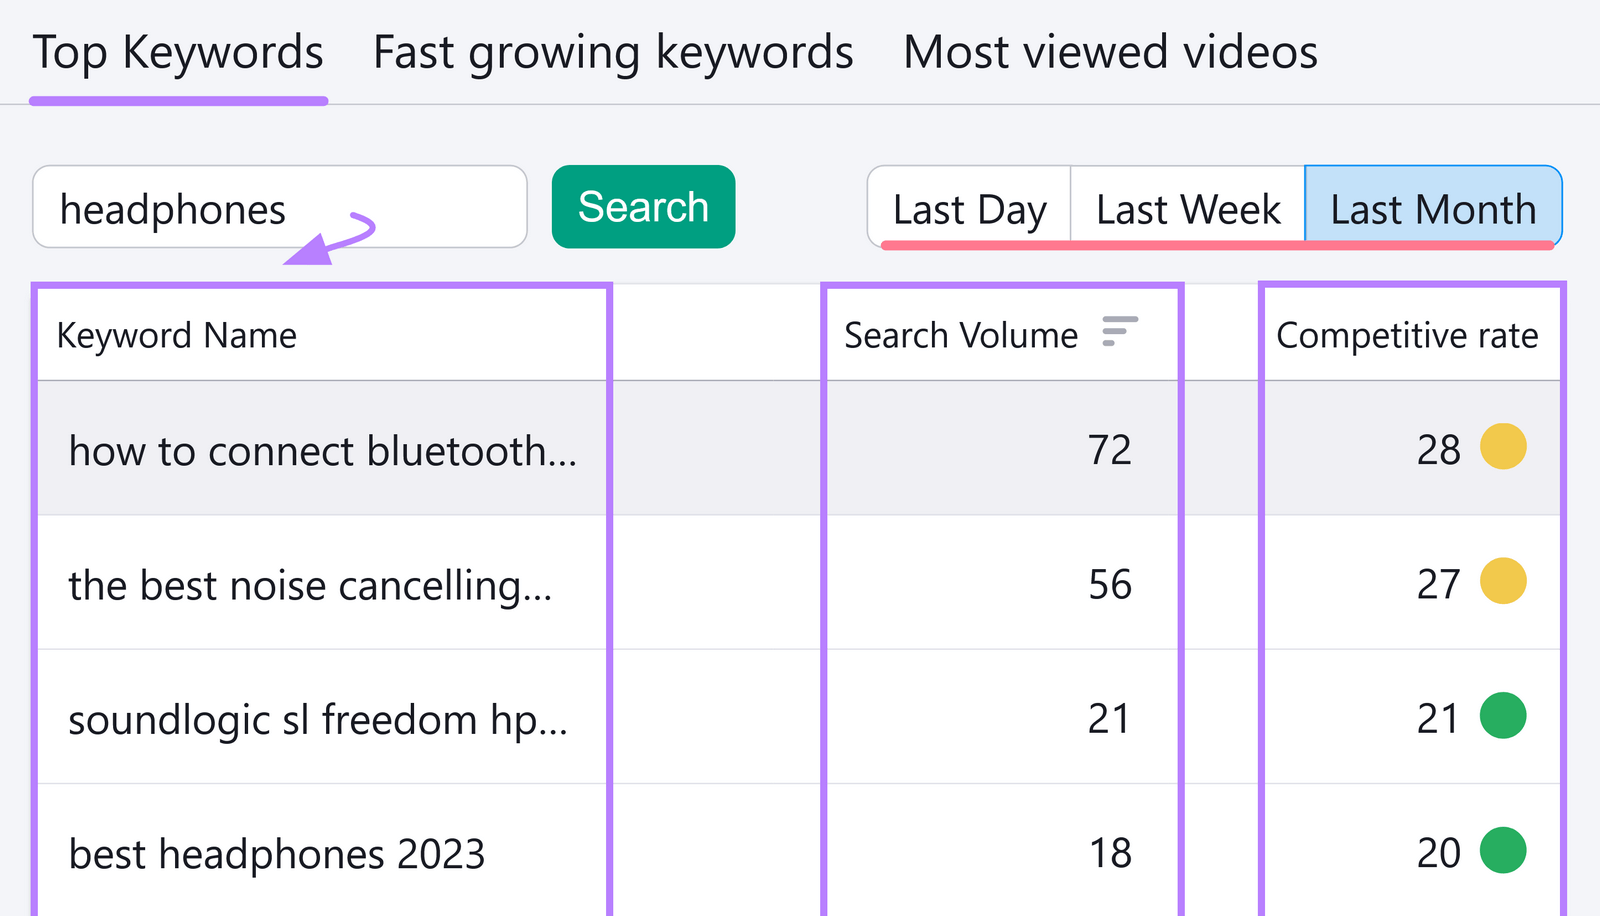 results with YouTube keywords and their “Search Volume” and “Competitive rate" metrics